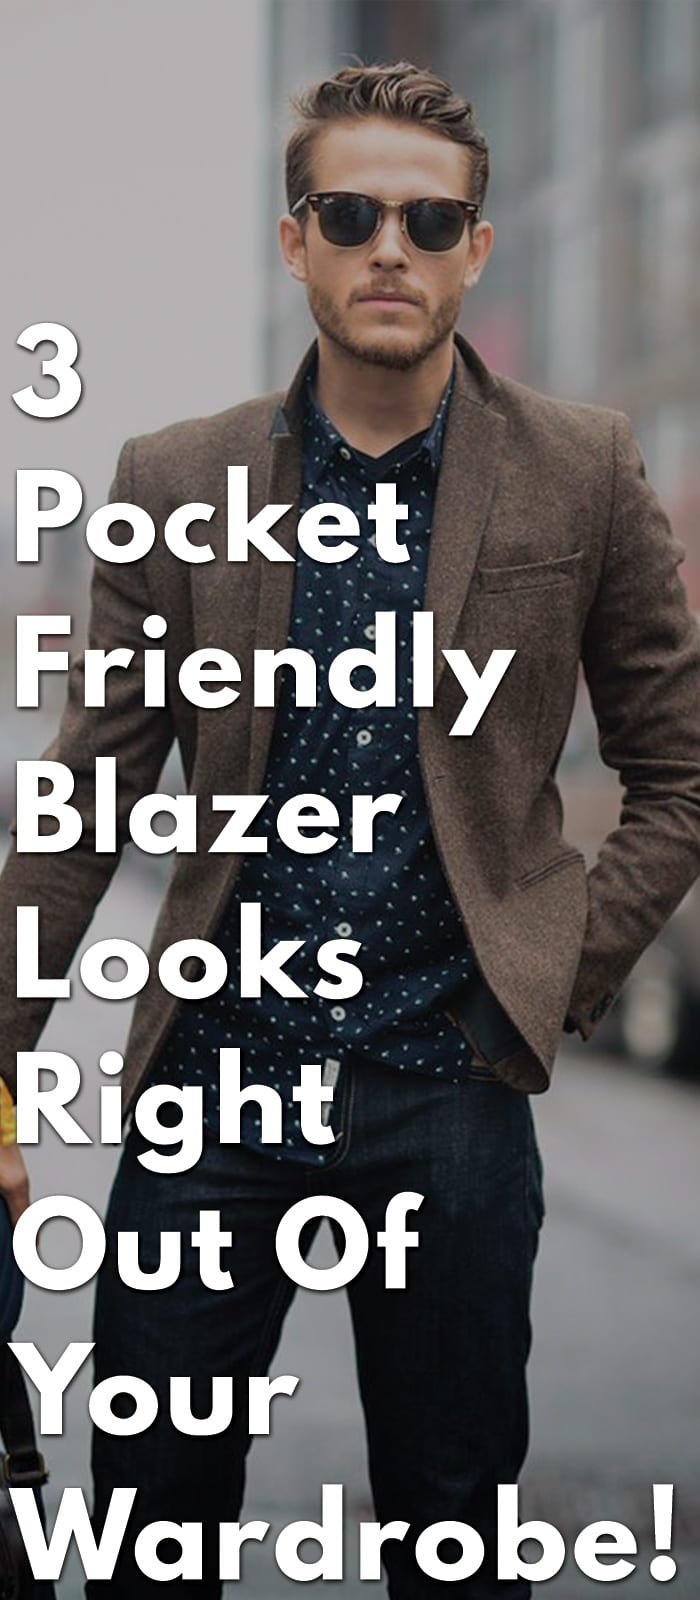 3-Pocket-Friendly-Blazer-Looks-Right-Out-of-Your-Wardrobe!